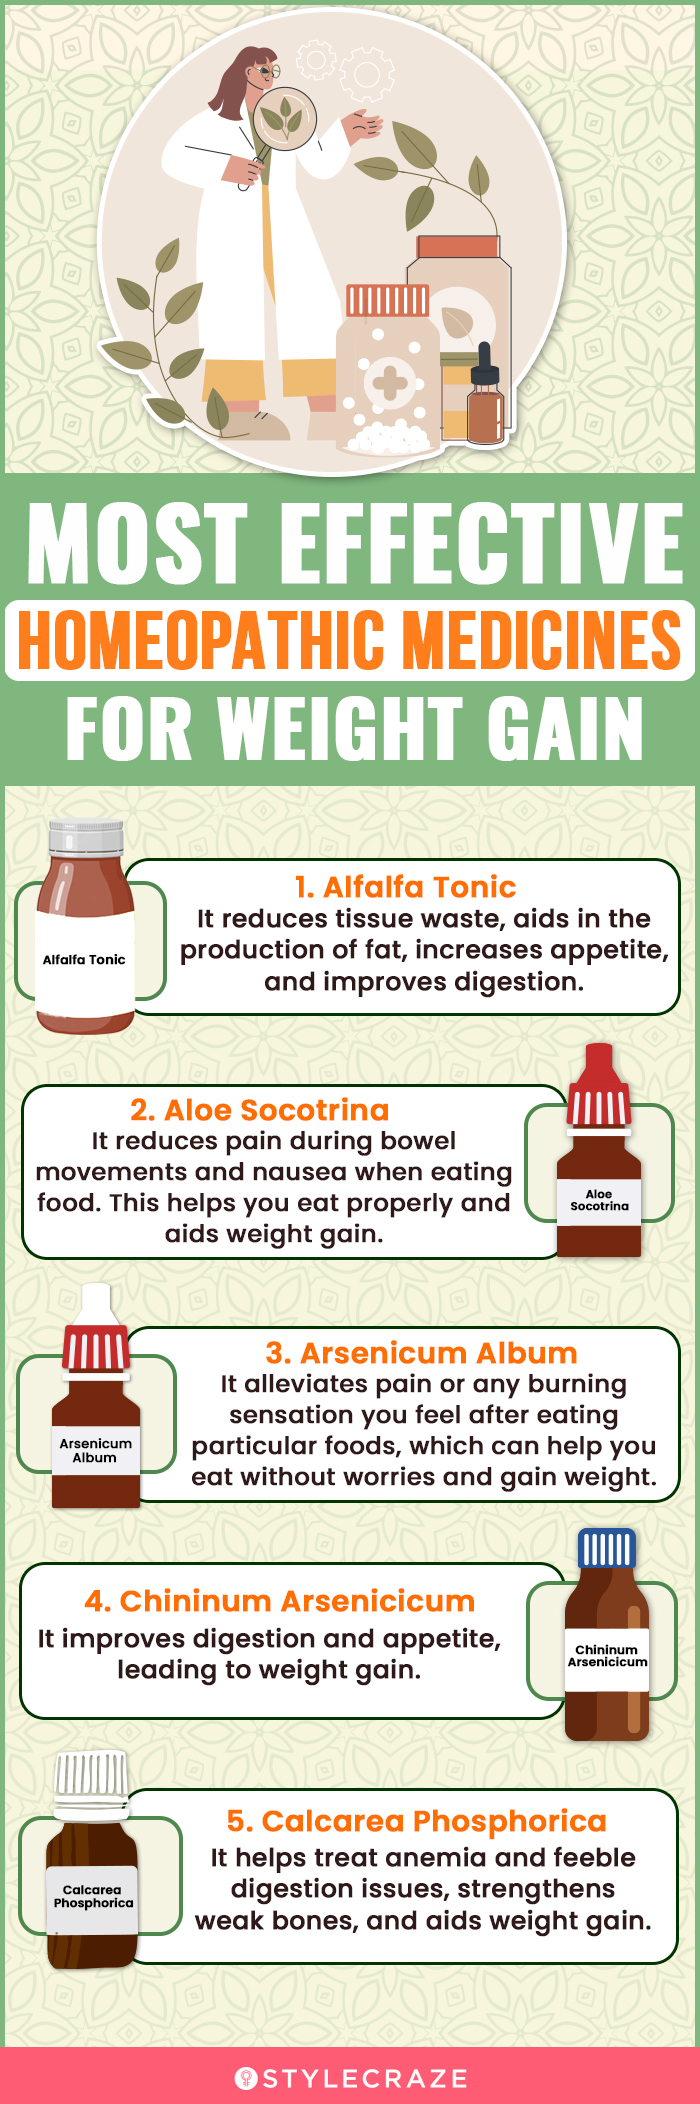 most effective homeopathic medicines for weight gain (infographic)